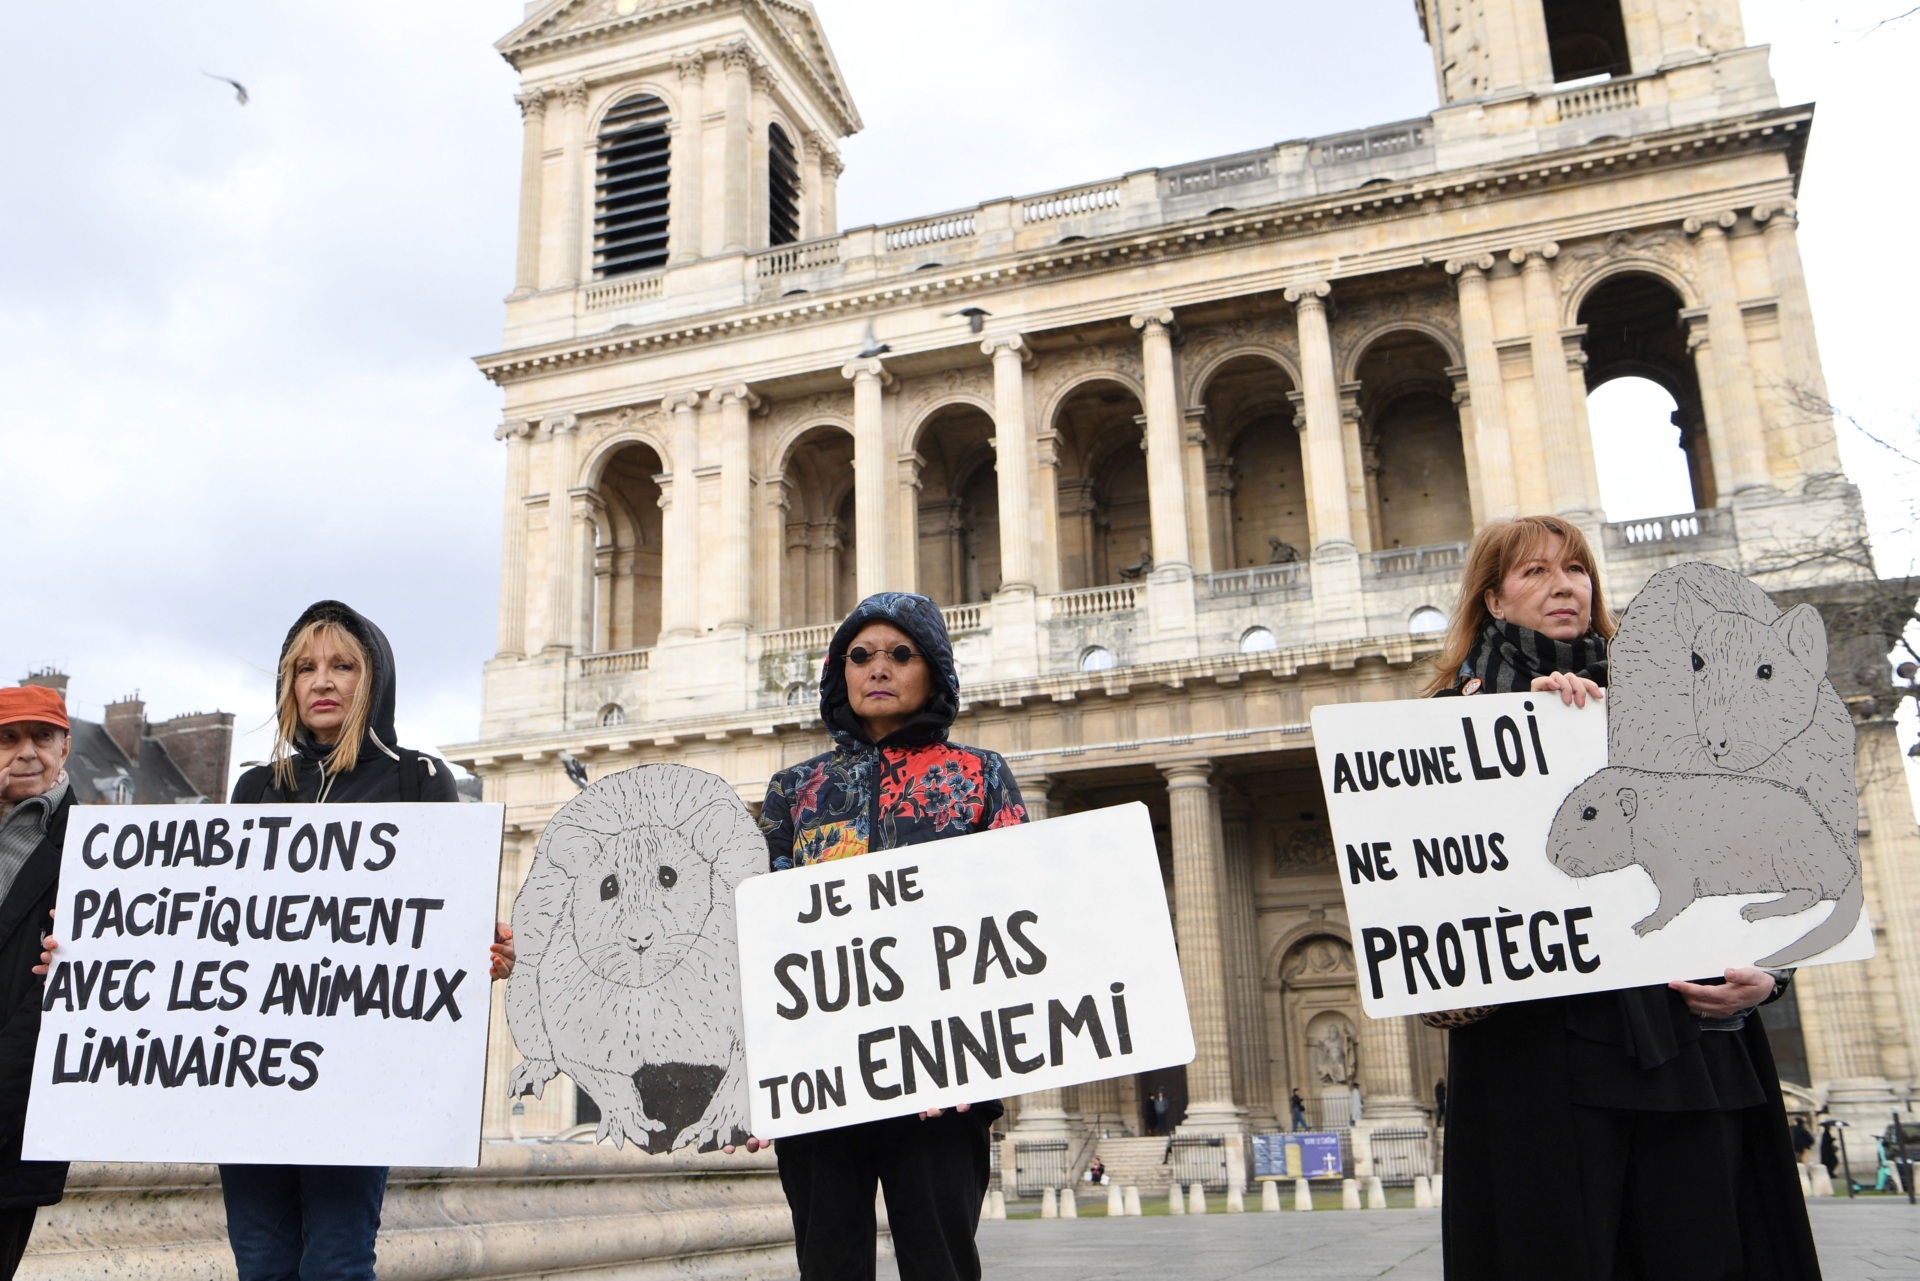 Members of the Paris Animaux Zoopolis (PAZ) association hold placards during a rally to call for the protection of liminal animals (rats, pigeons), in Paris on March 18, 2023. (Photo by Bertrand GUAY / AFP) (Photo by BERTRAND GUAY/AFP via Getty Images)